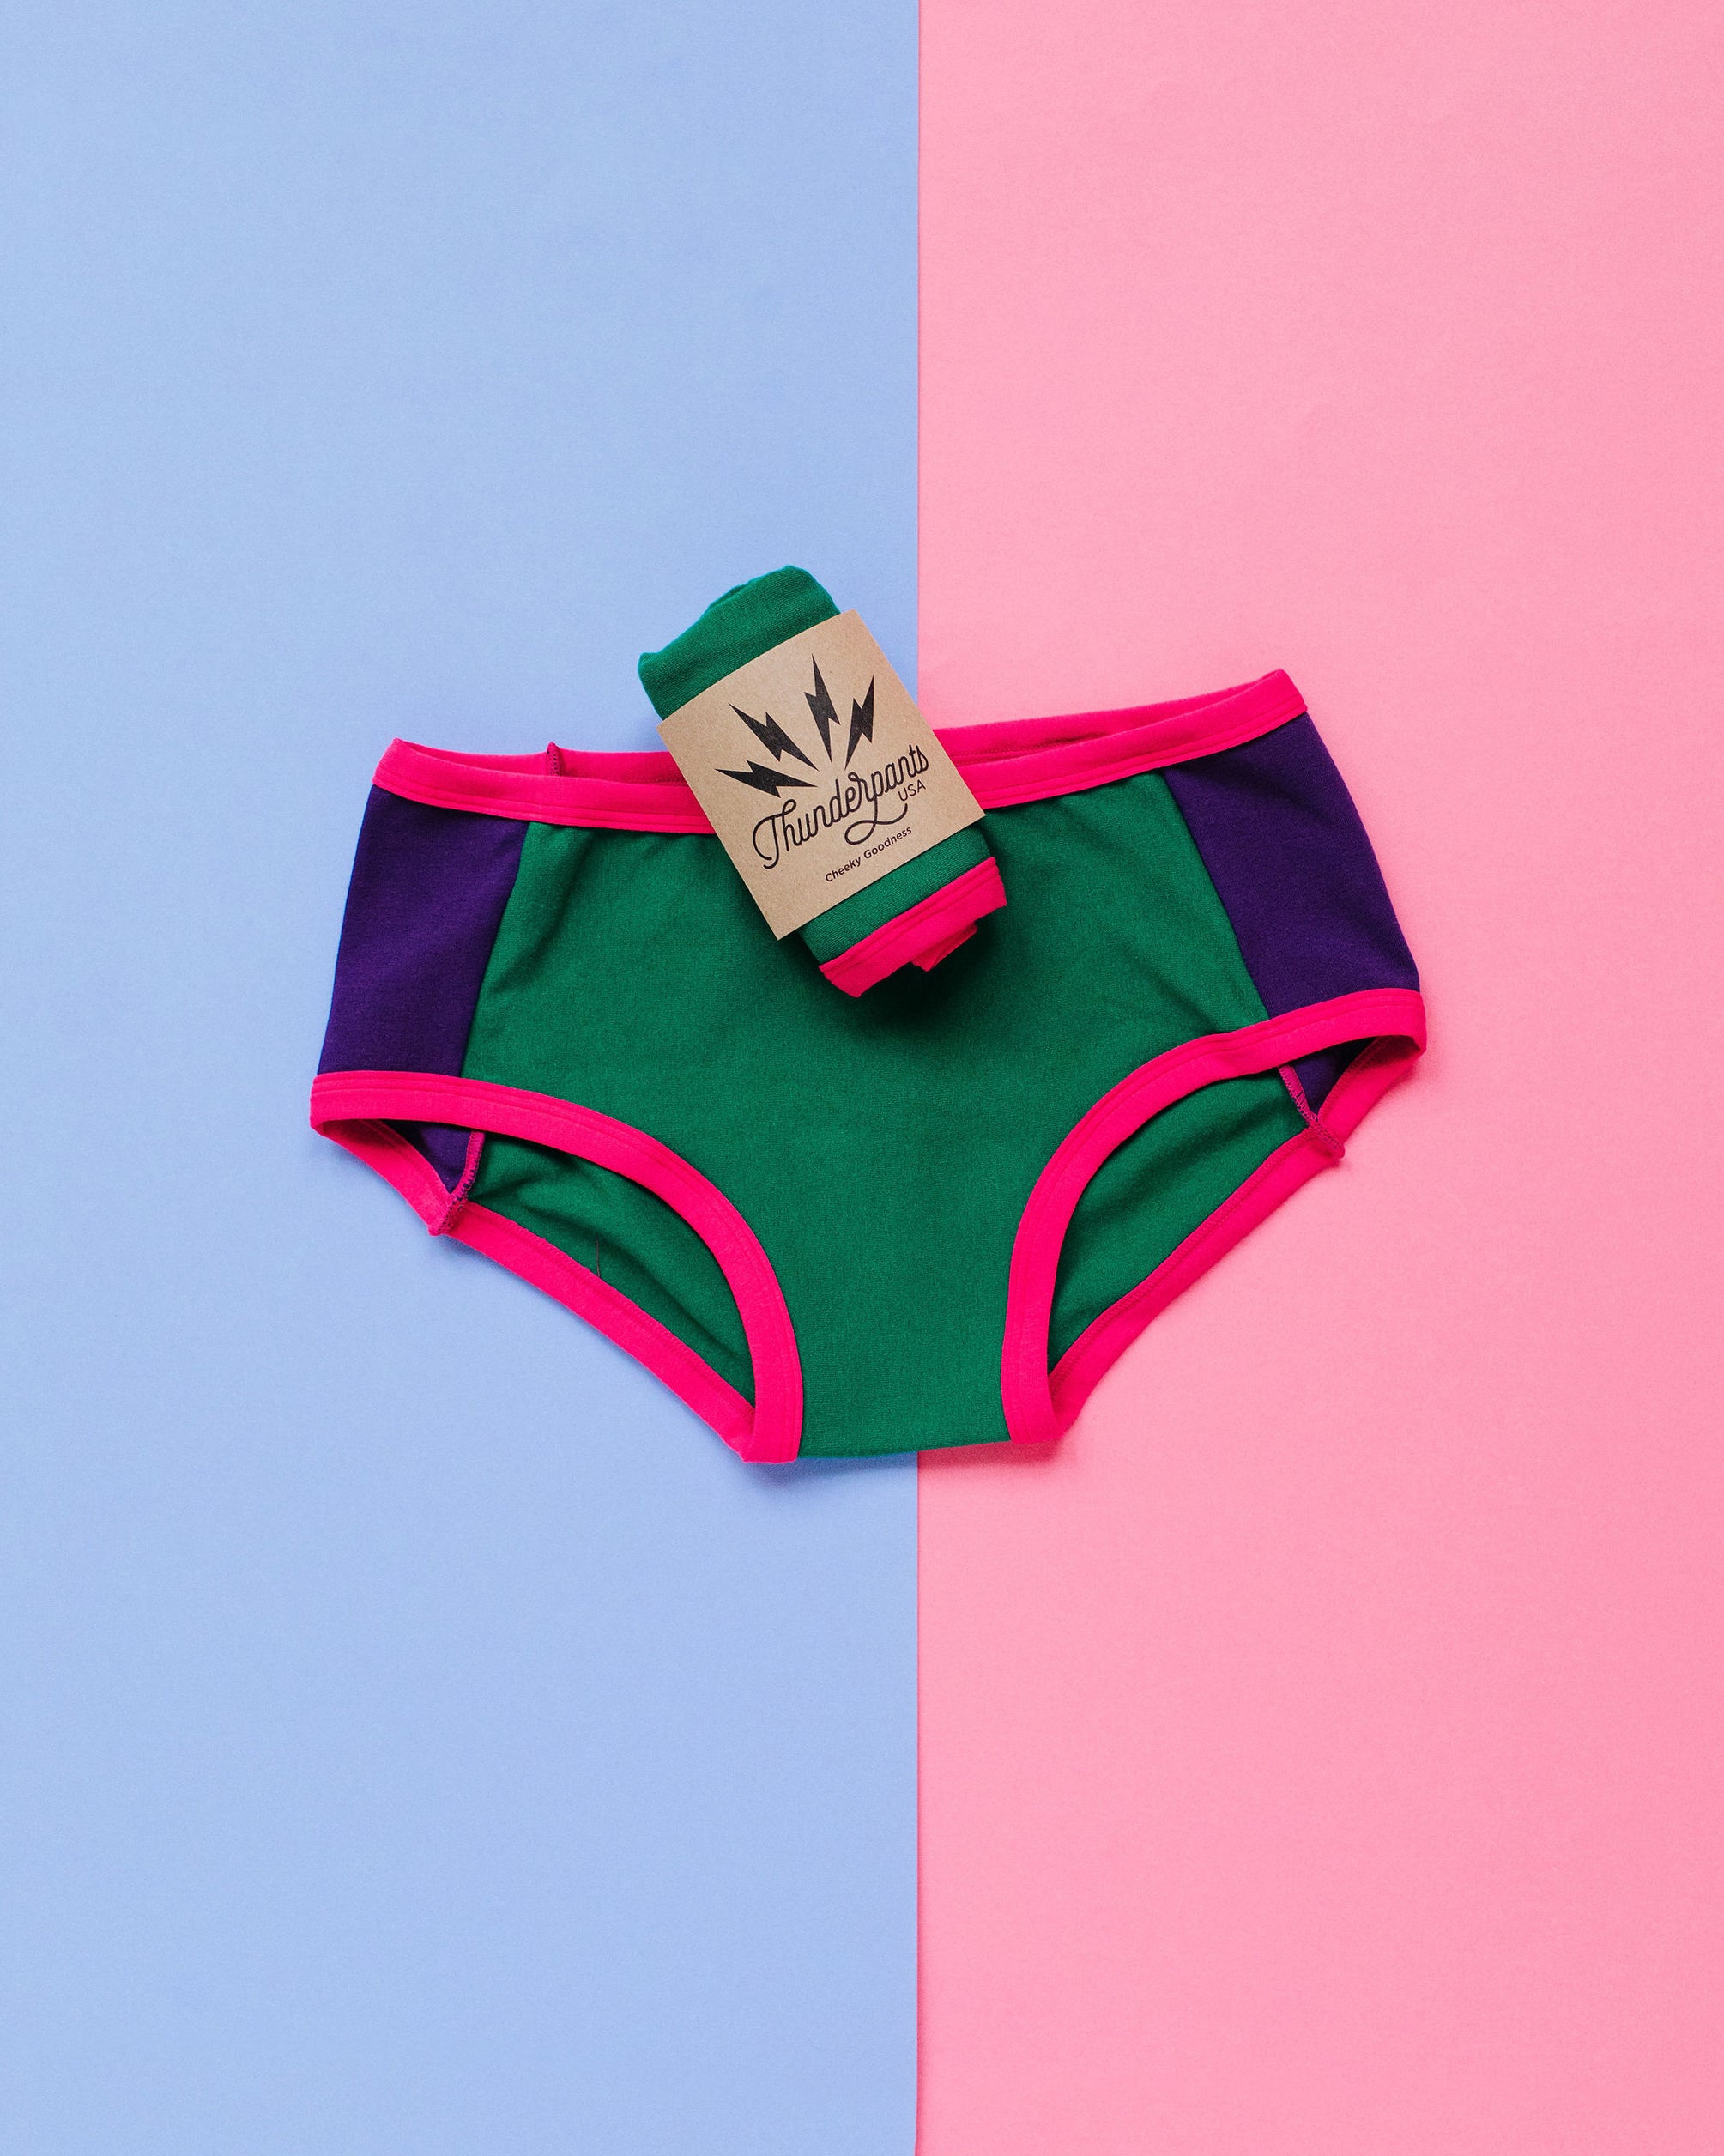 Flat lay of Thunderpants Hipster Panel Pants style underwear in 90's Dream - purple sides, green middle, and pink binding.